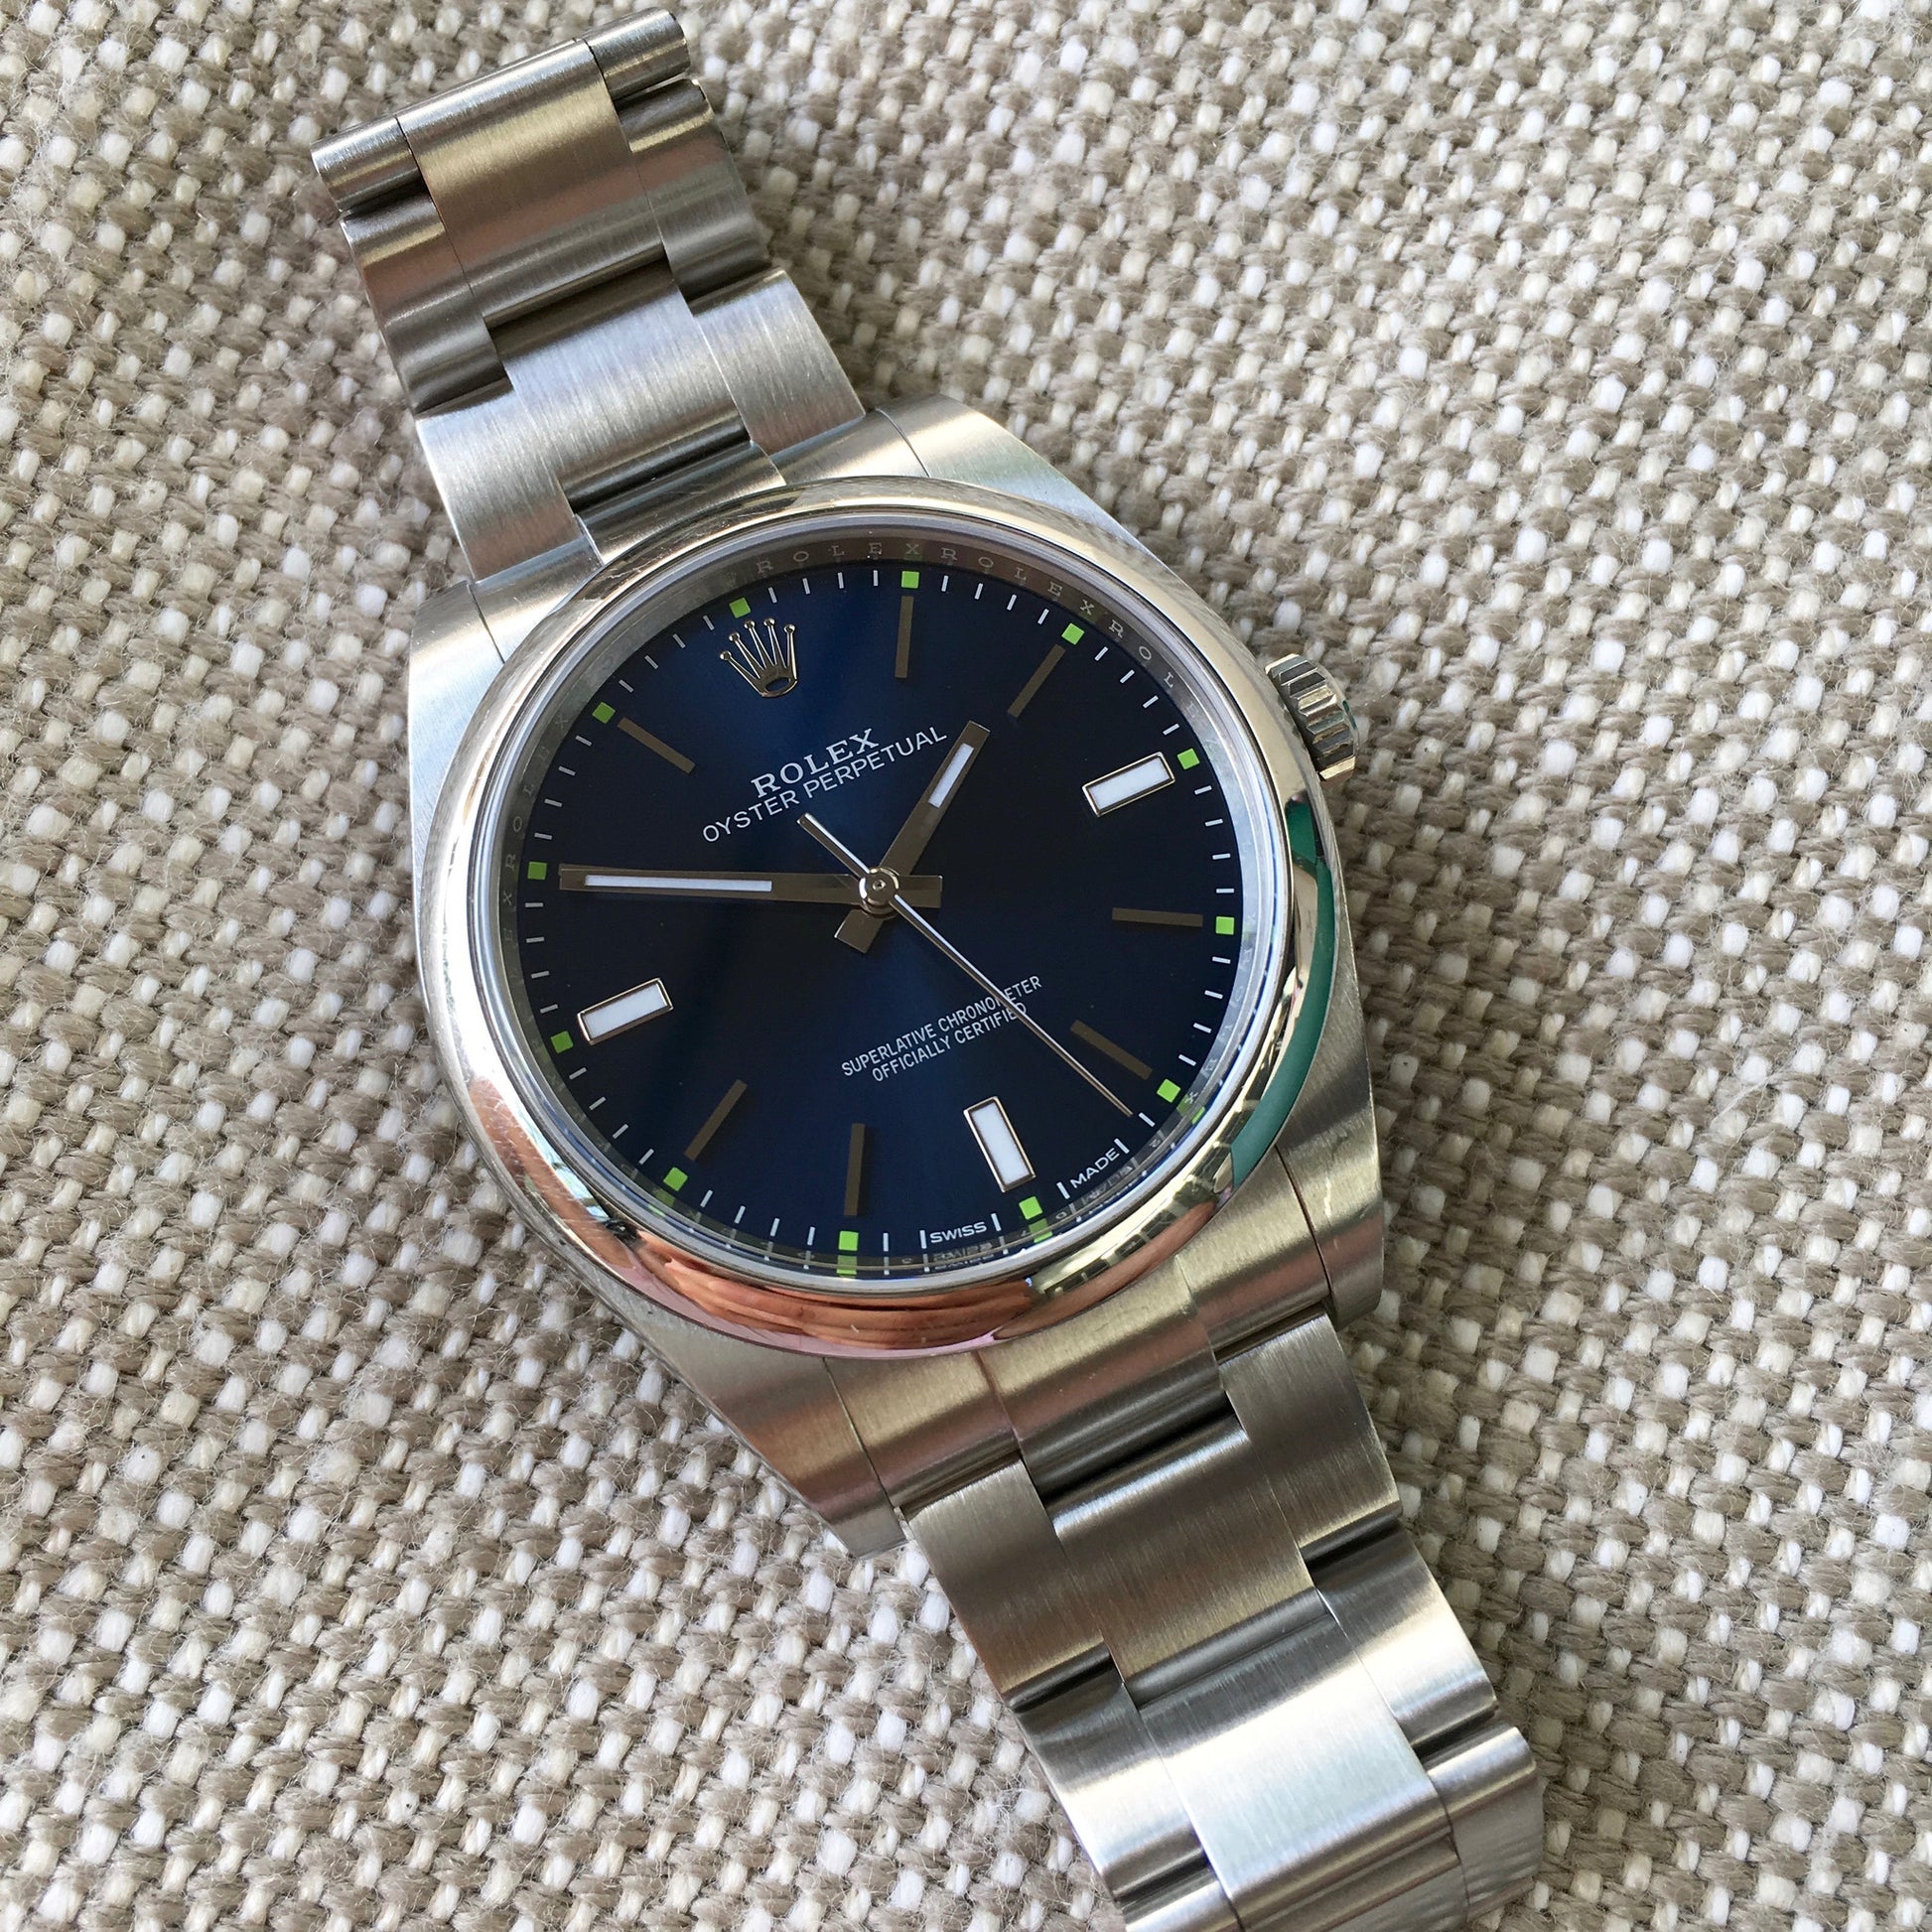 Rolex Oyster Perpetual 114300 Blue Green Stainless Steel Mens Automatic Watch - Hashtag Watch Company